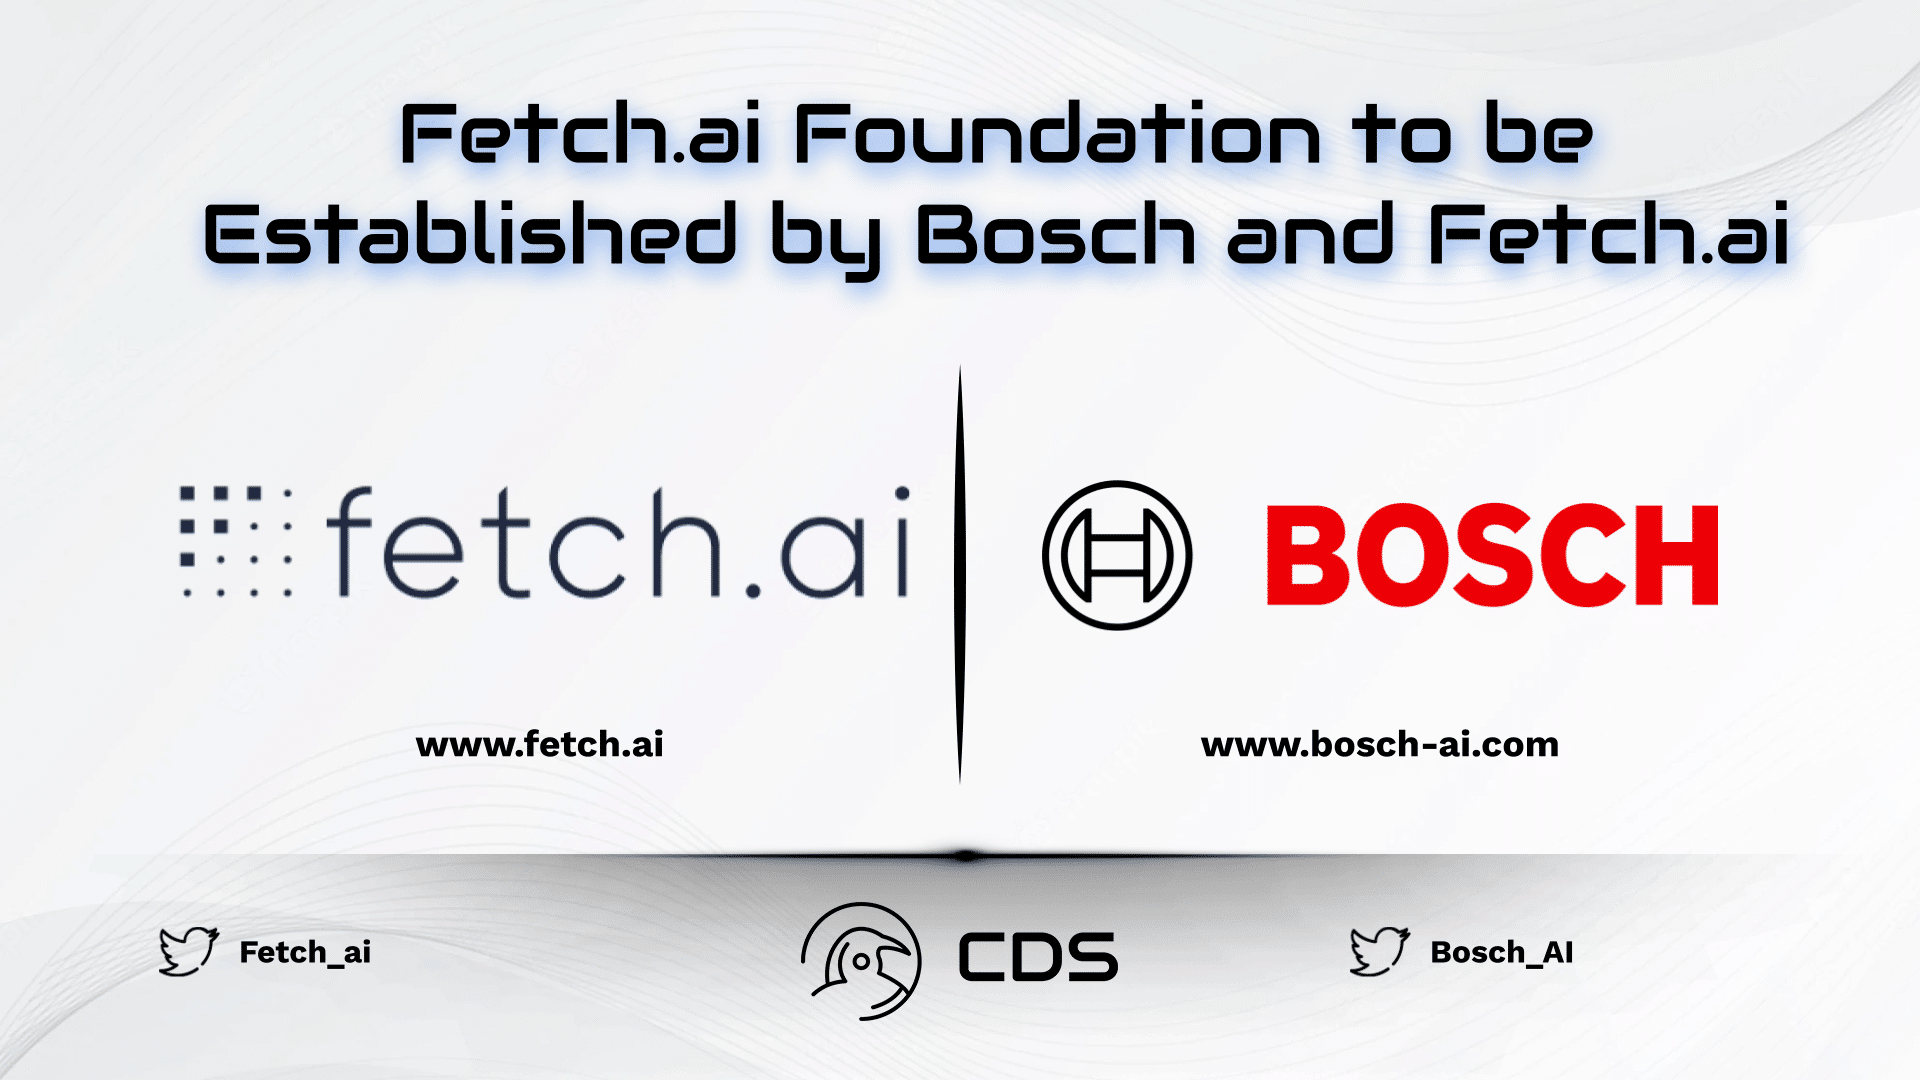 Fetch.ai Foundation to be Established by Bosch and Fetch.ai